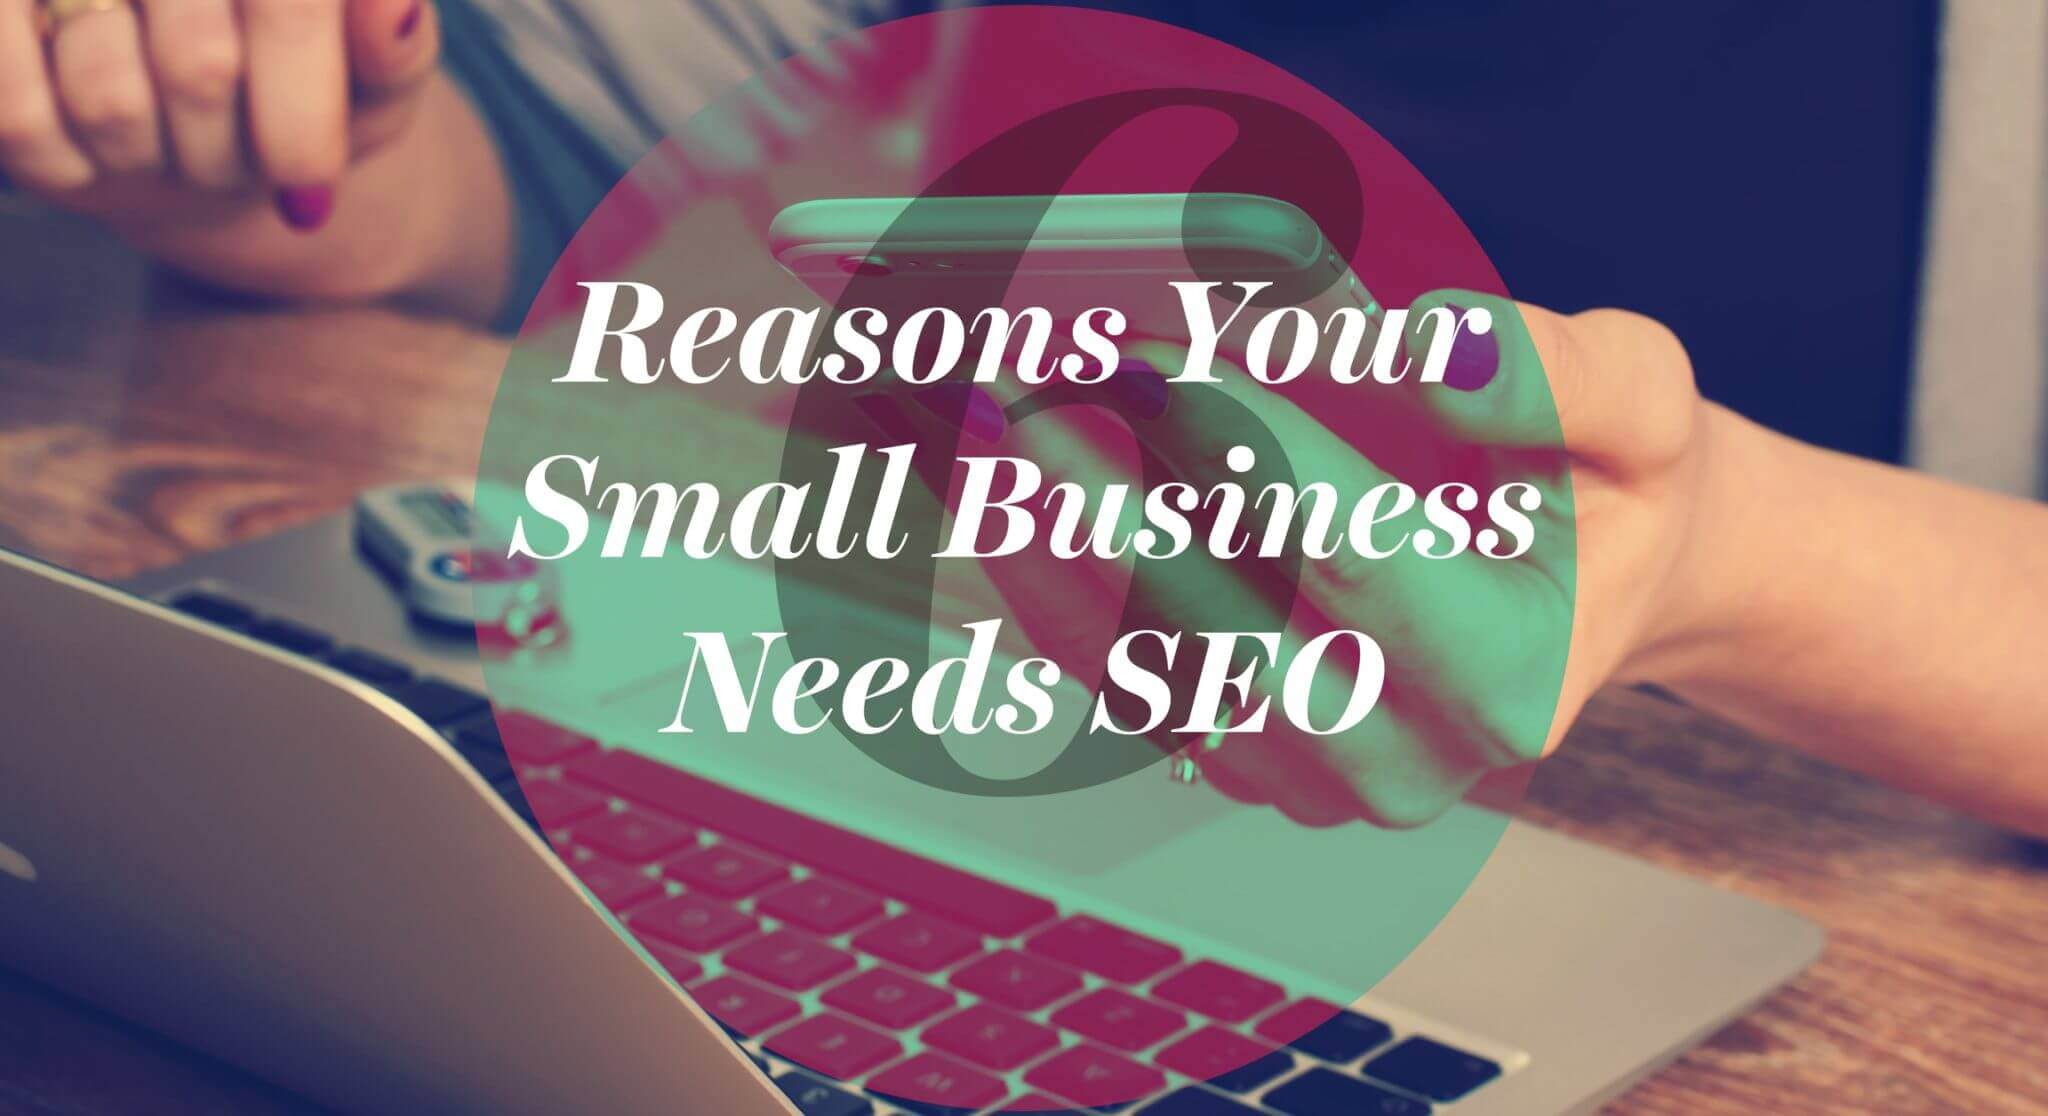 6 Reasons Your Small Business Needs SEO